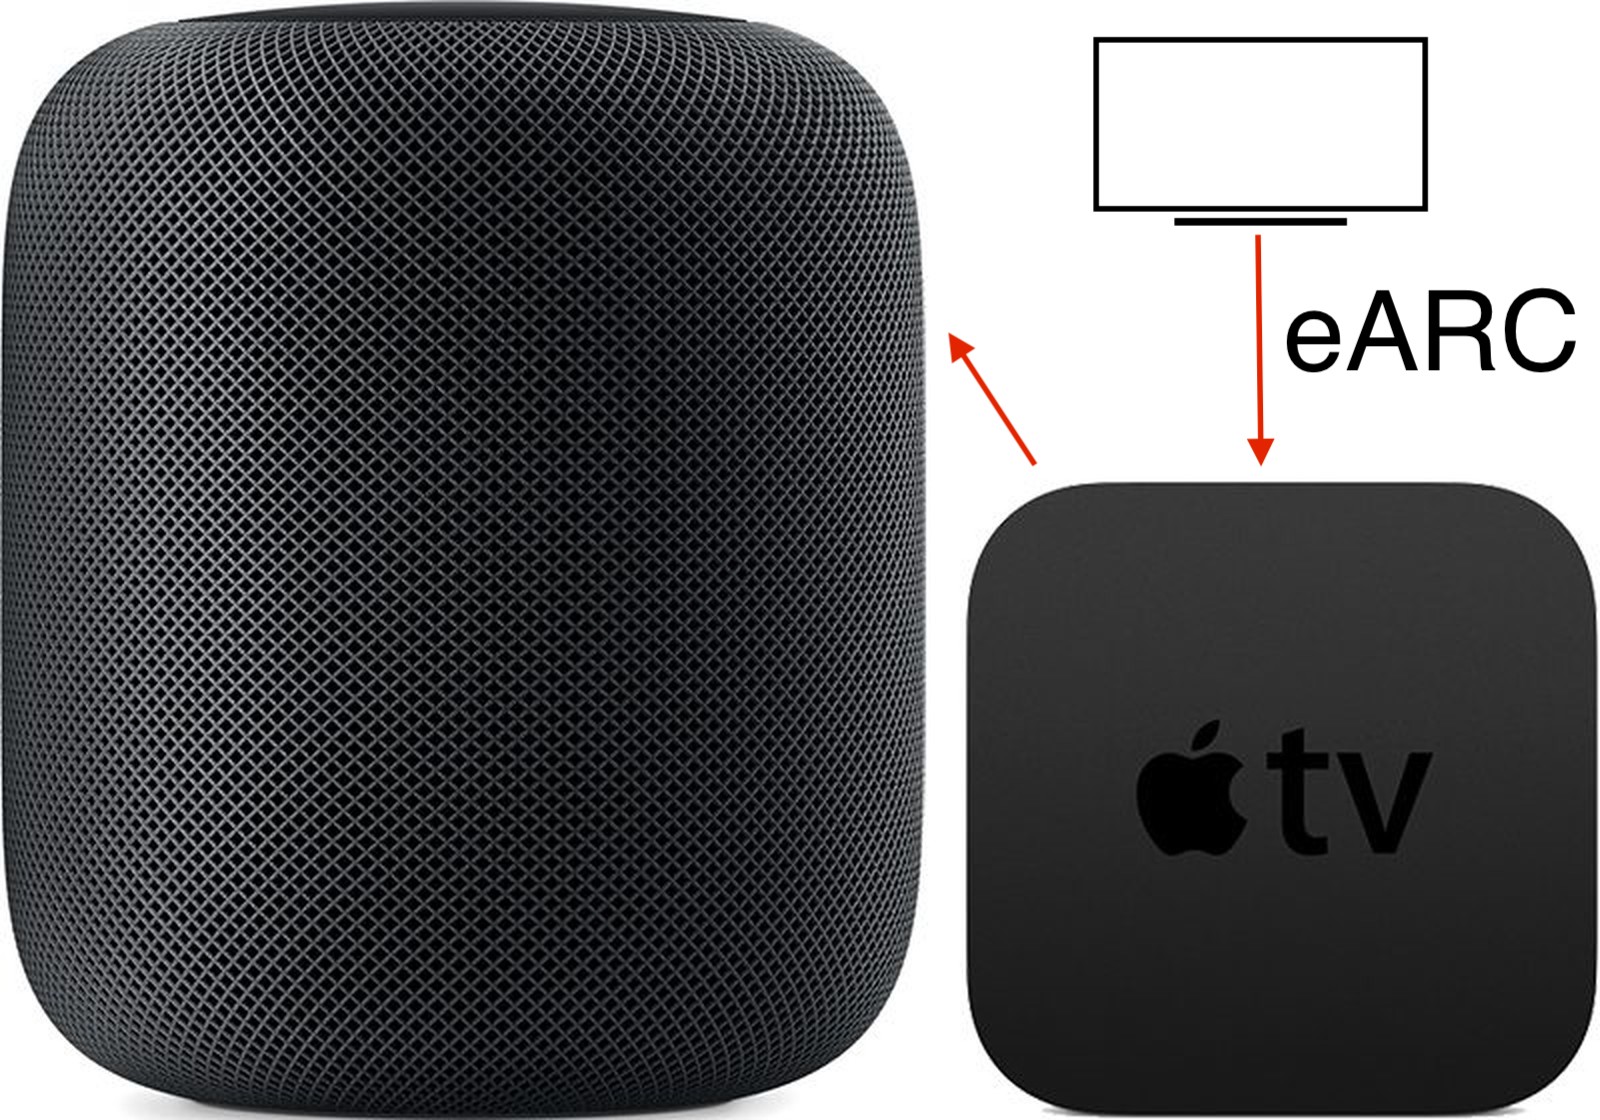 Converge Interessant afbryde The New 2021 Apple TV 4K (2nd gen) adds eARC support for the discontinued  HomePod - The Tape Drive